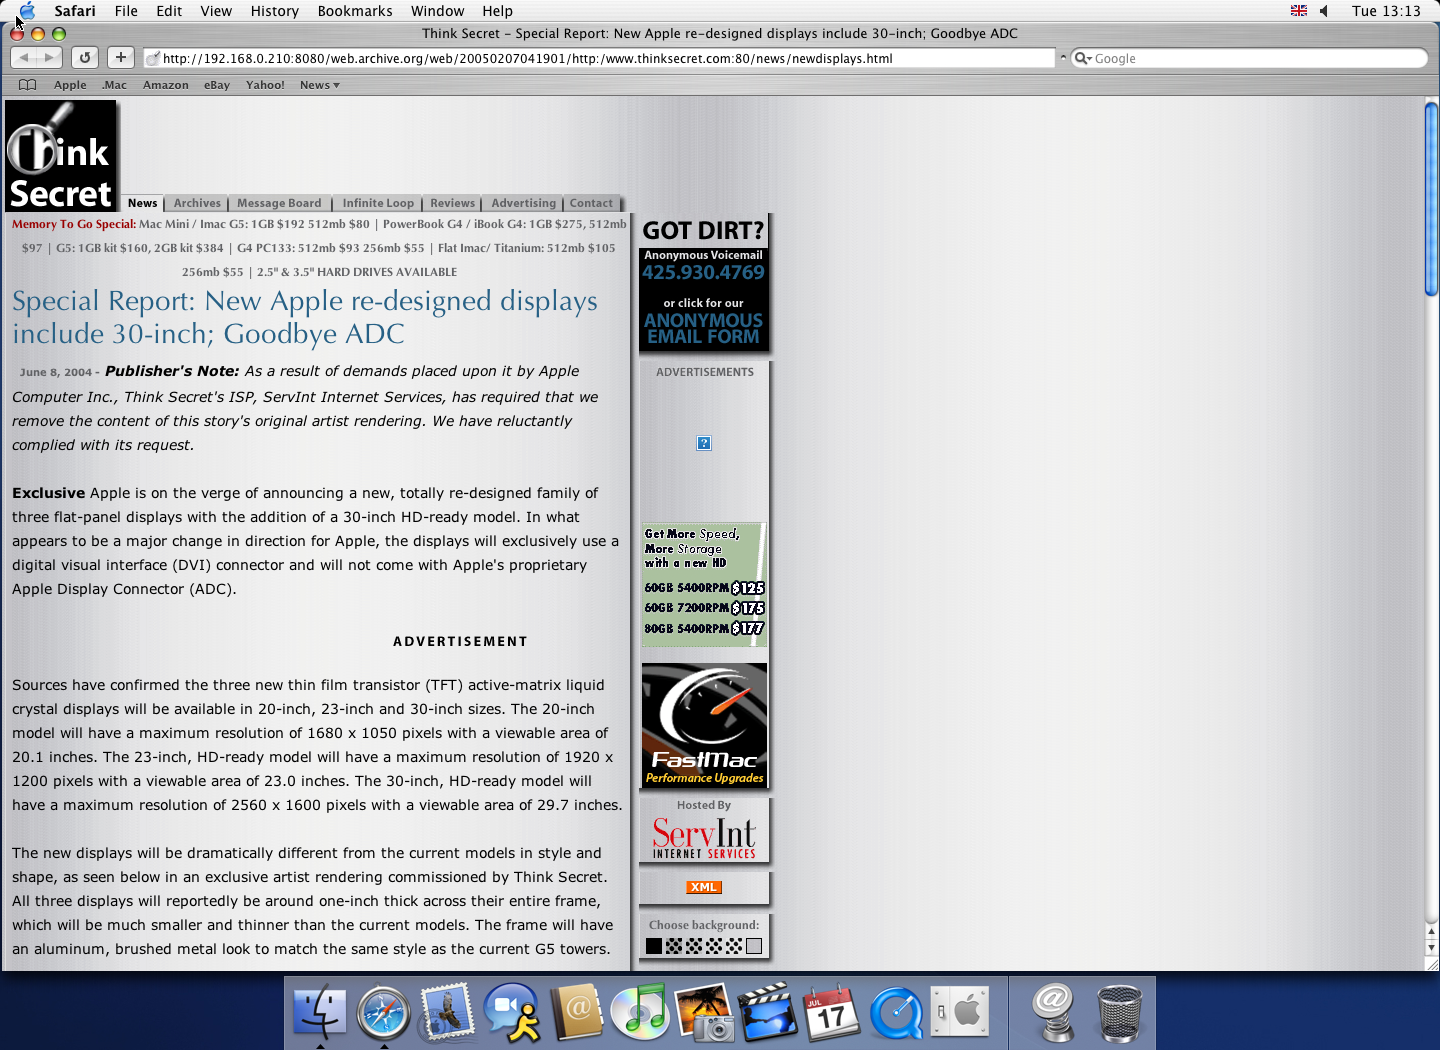 OS X 10.3 PPC with Safari 1.1 displaying a page from Think Secret archived at February 07, 2005 at 04:19:01